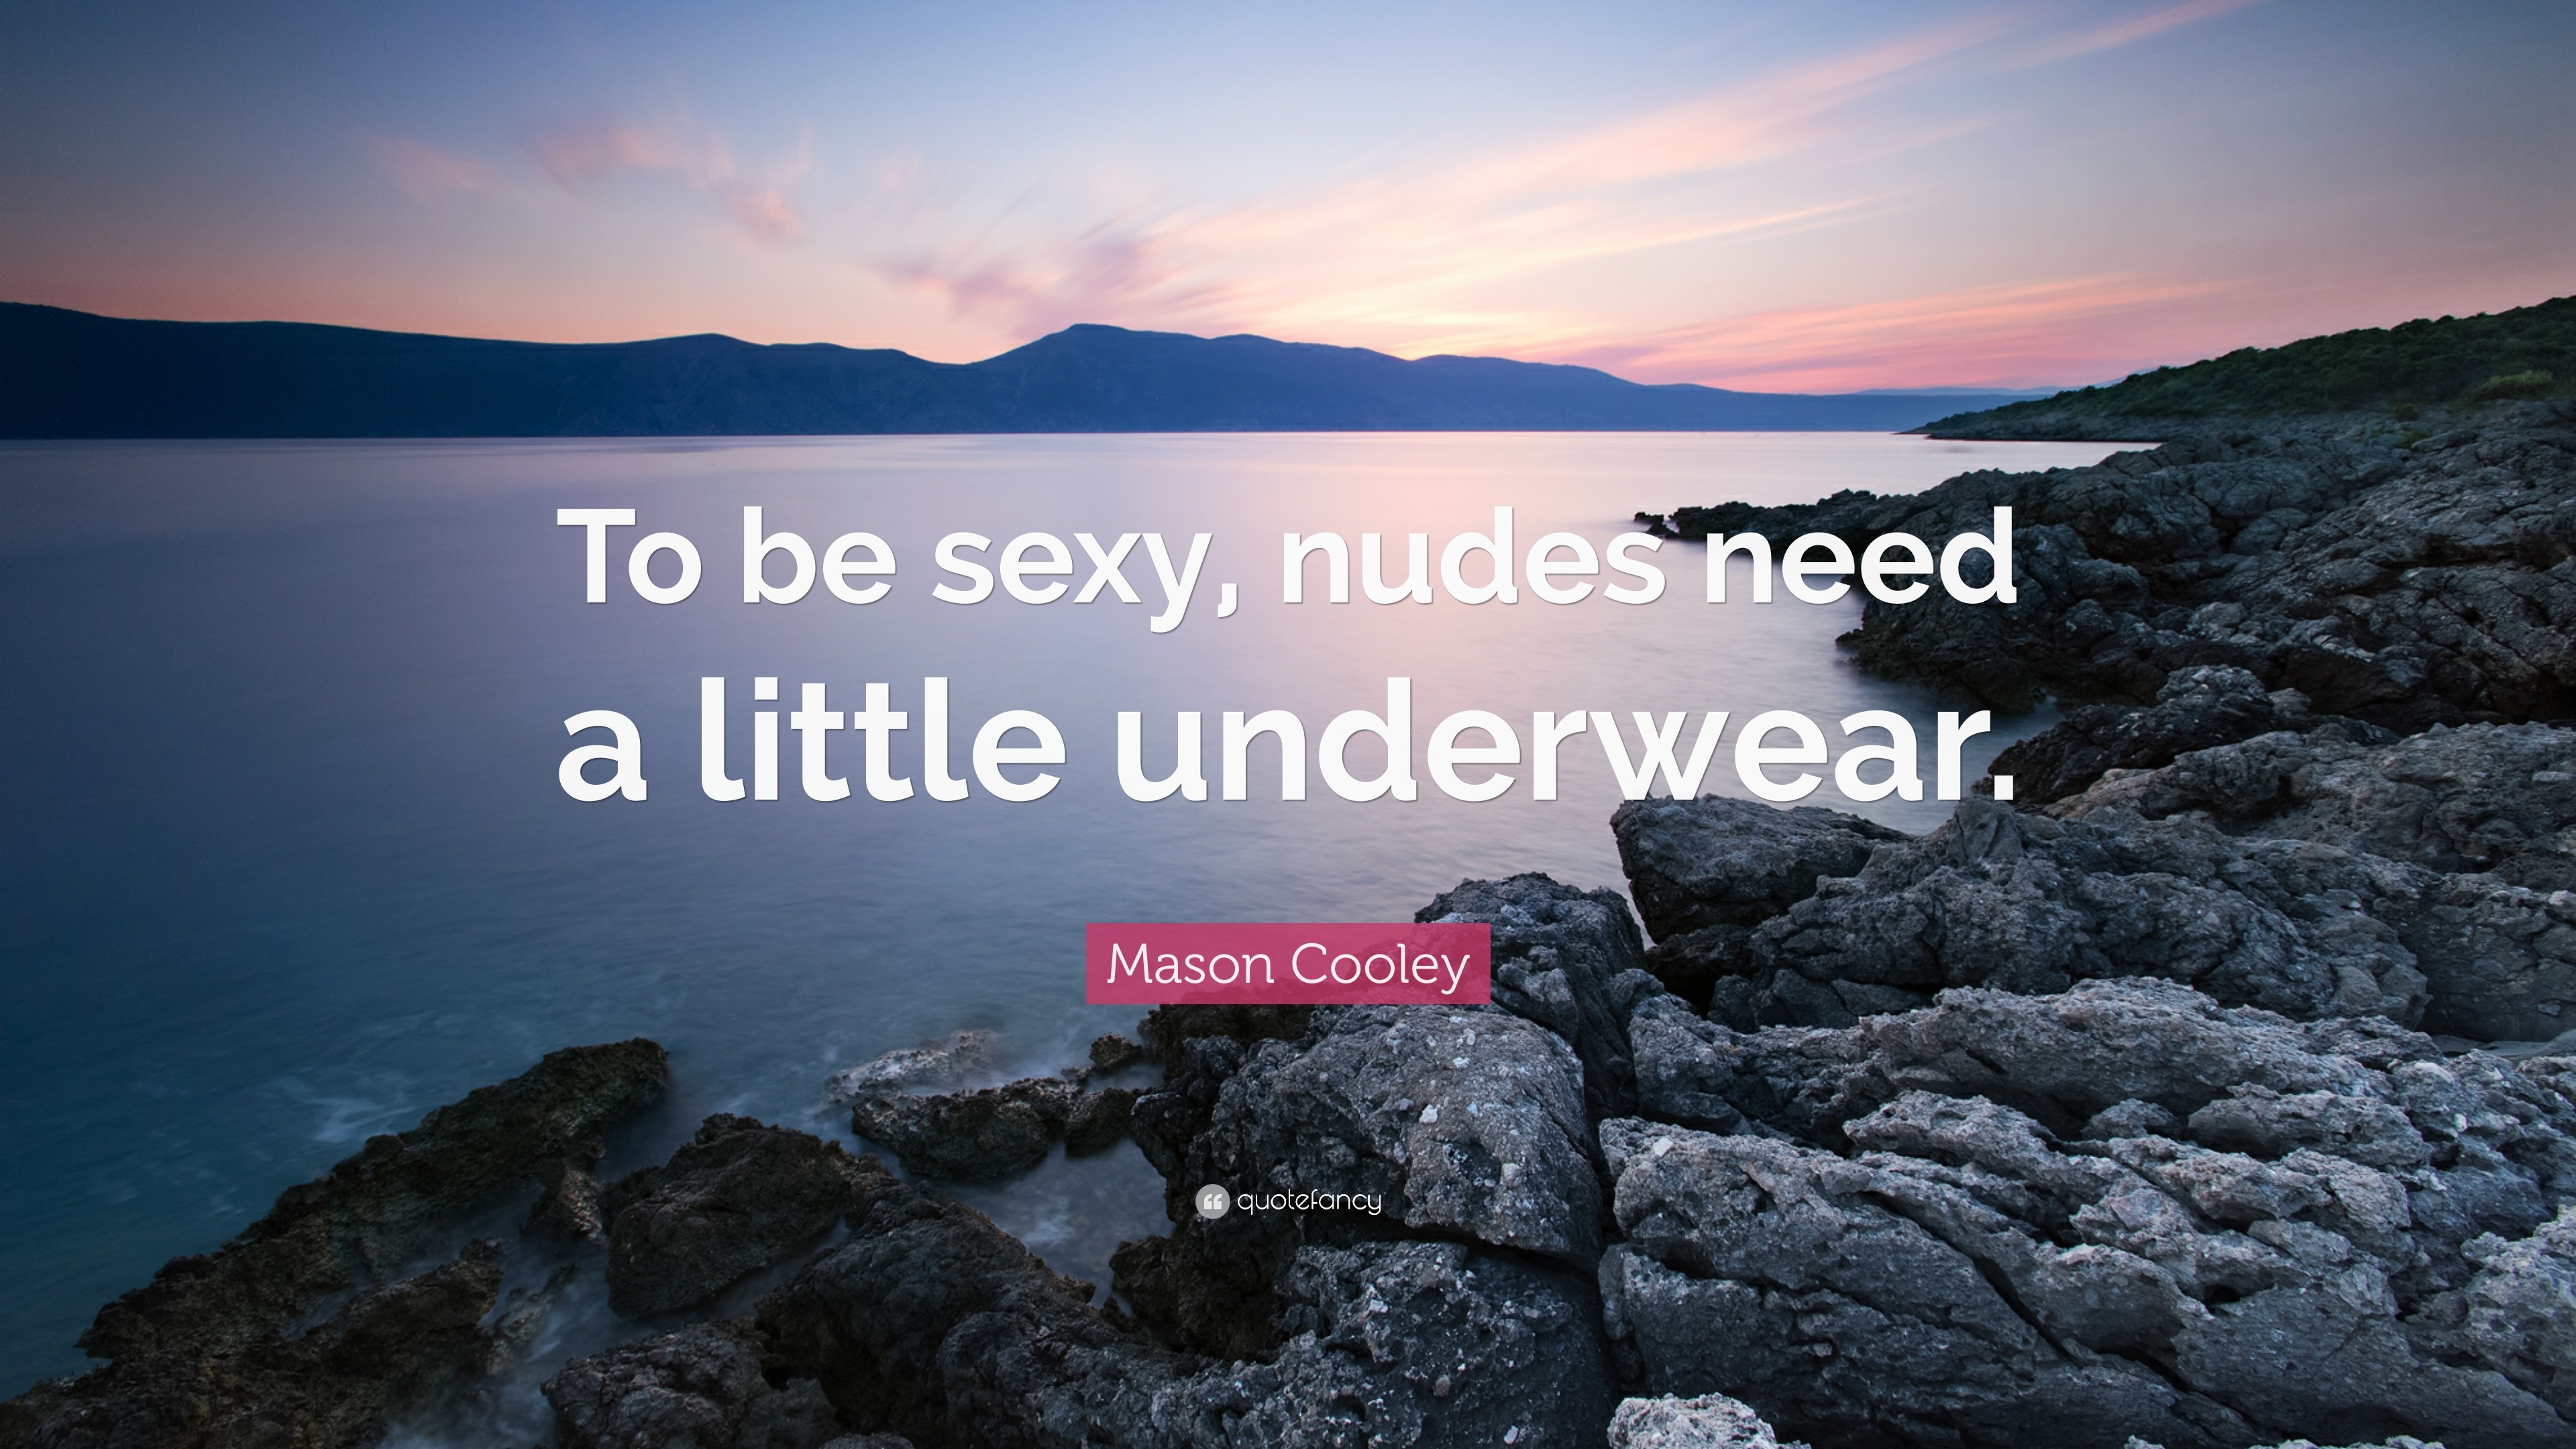 Mason Cooley Quote: “To be sexy, nudes need a little underwear.”